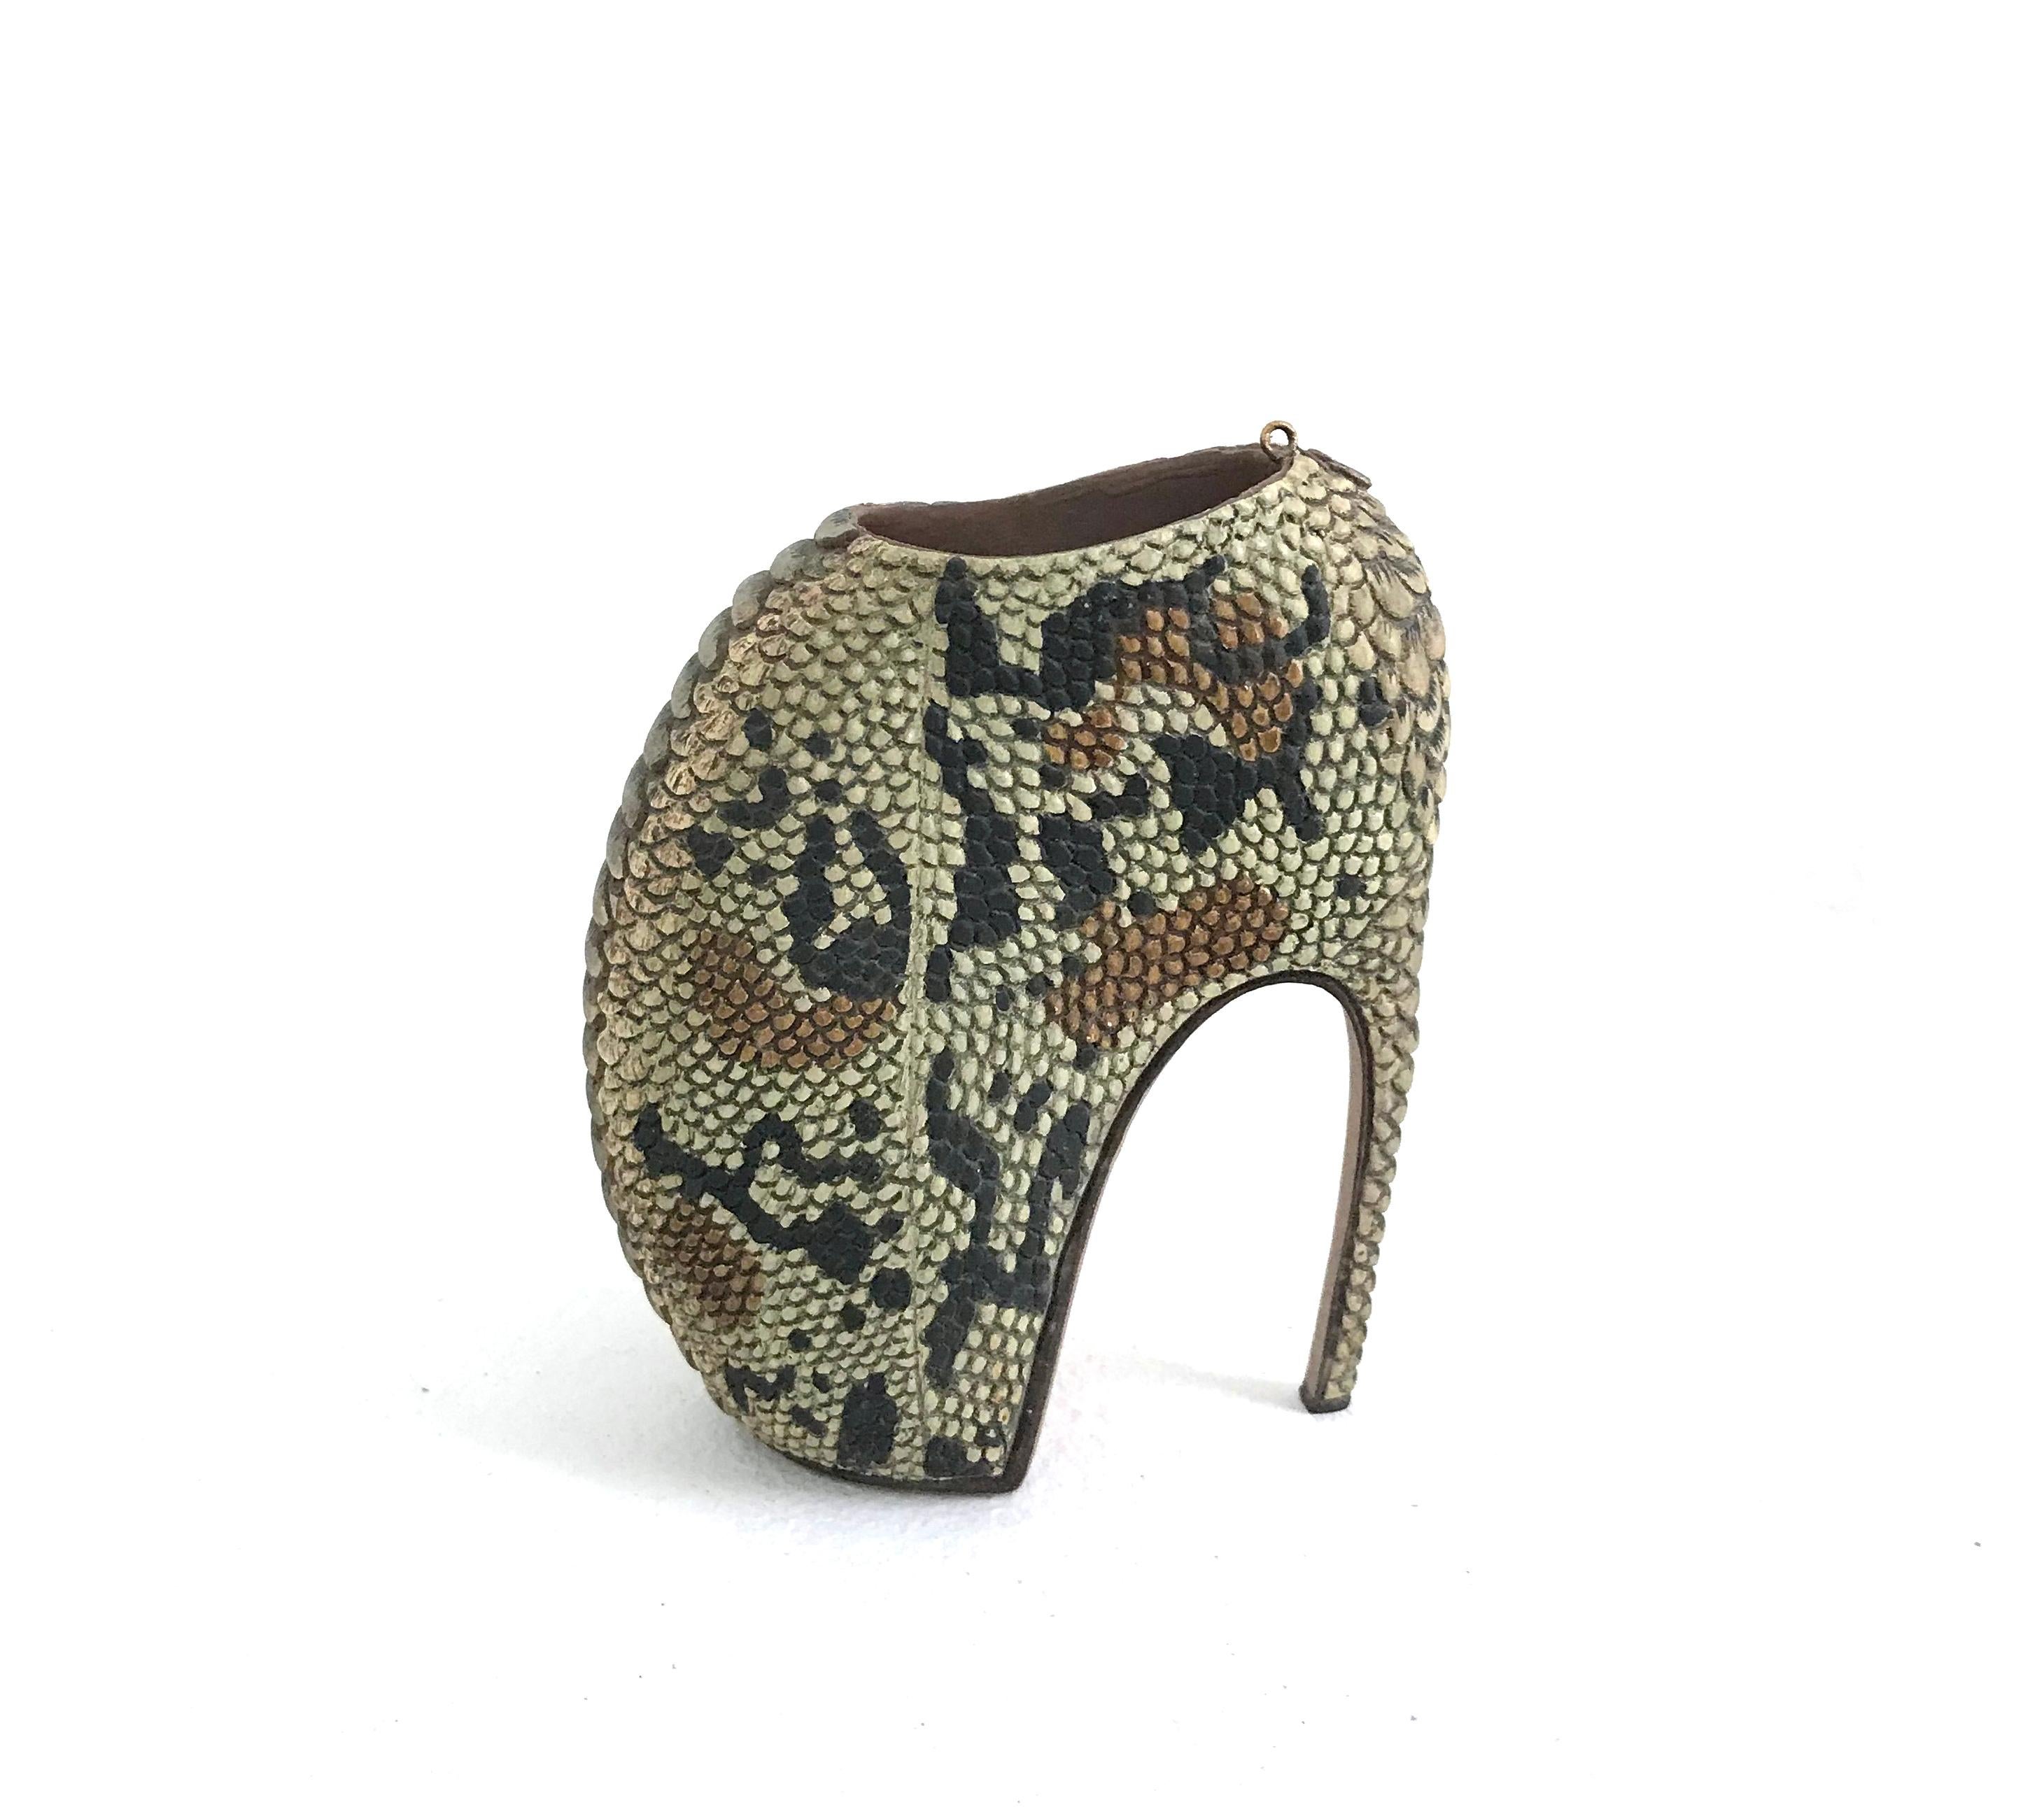 Image of A Pair of Python Armadillo Boots, 2015 (python skin) by Alexander  McQueen (est.1992)